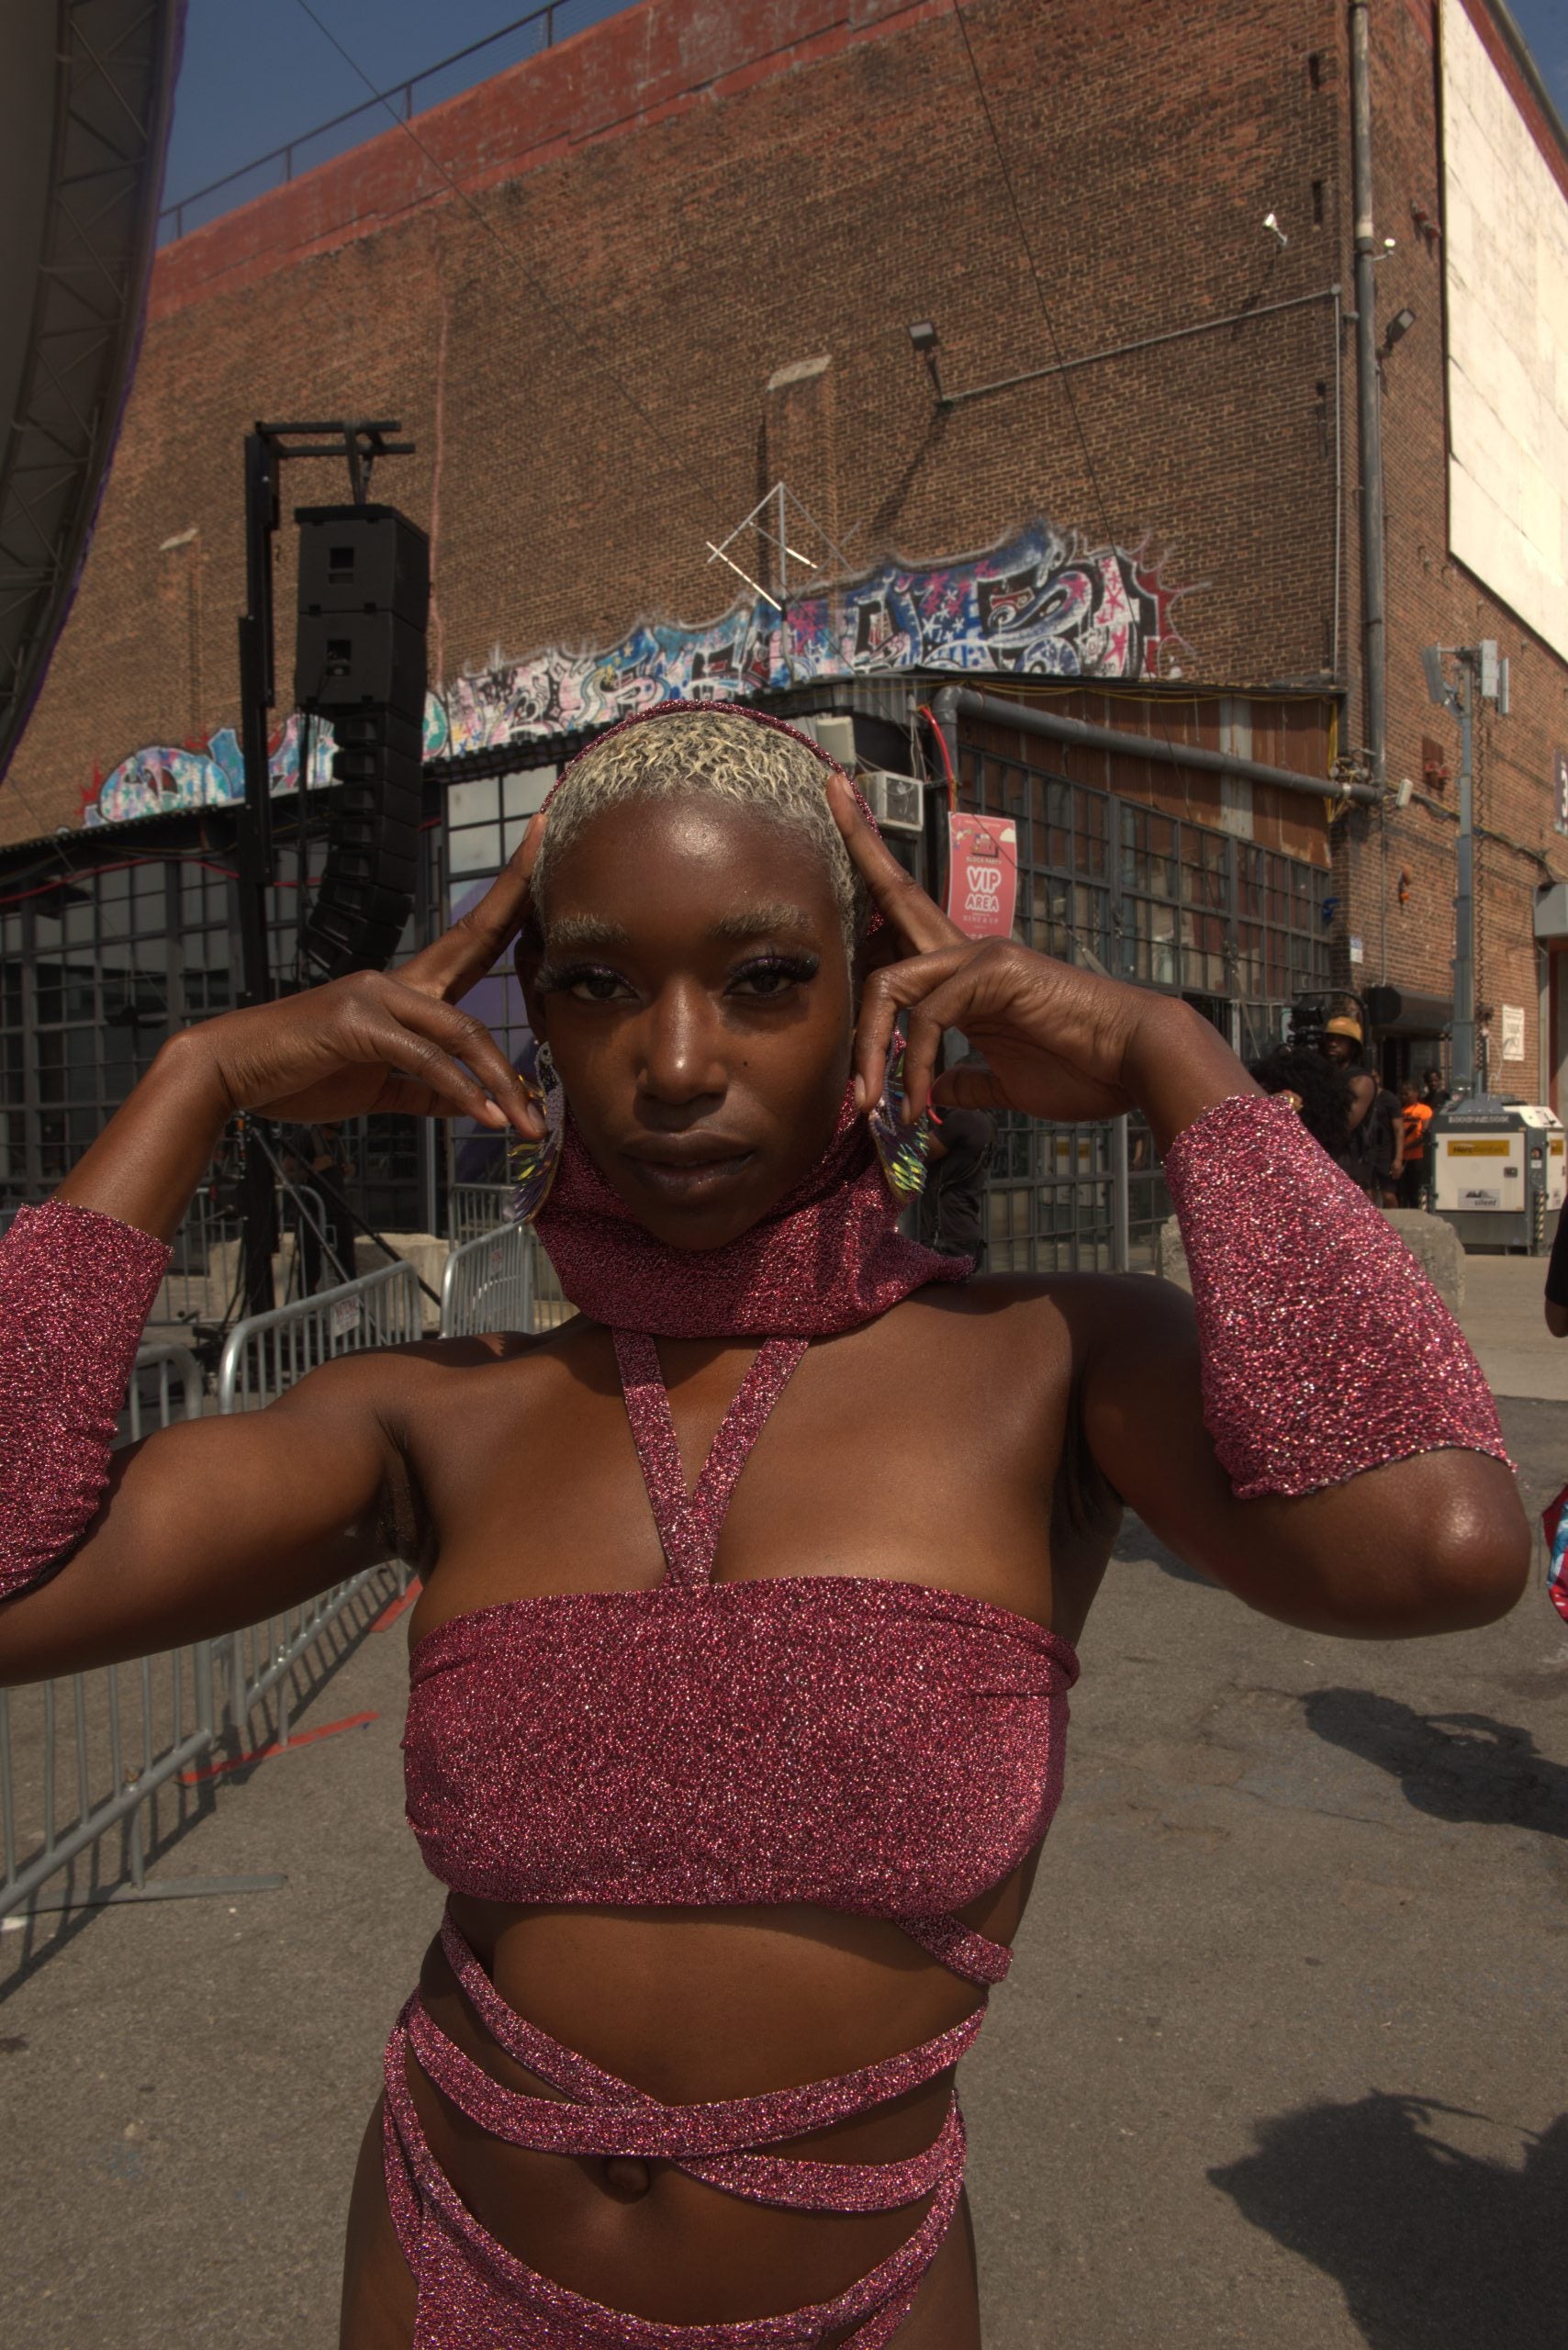 The Best Looks From Afropunk Festival